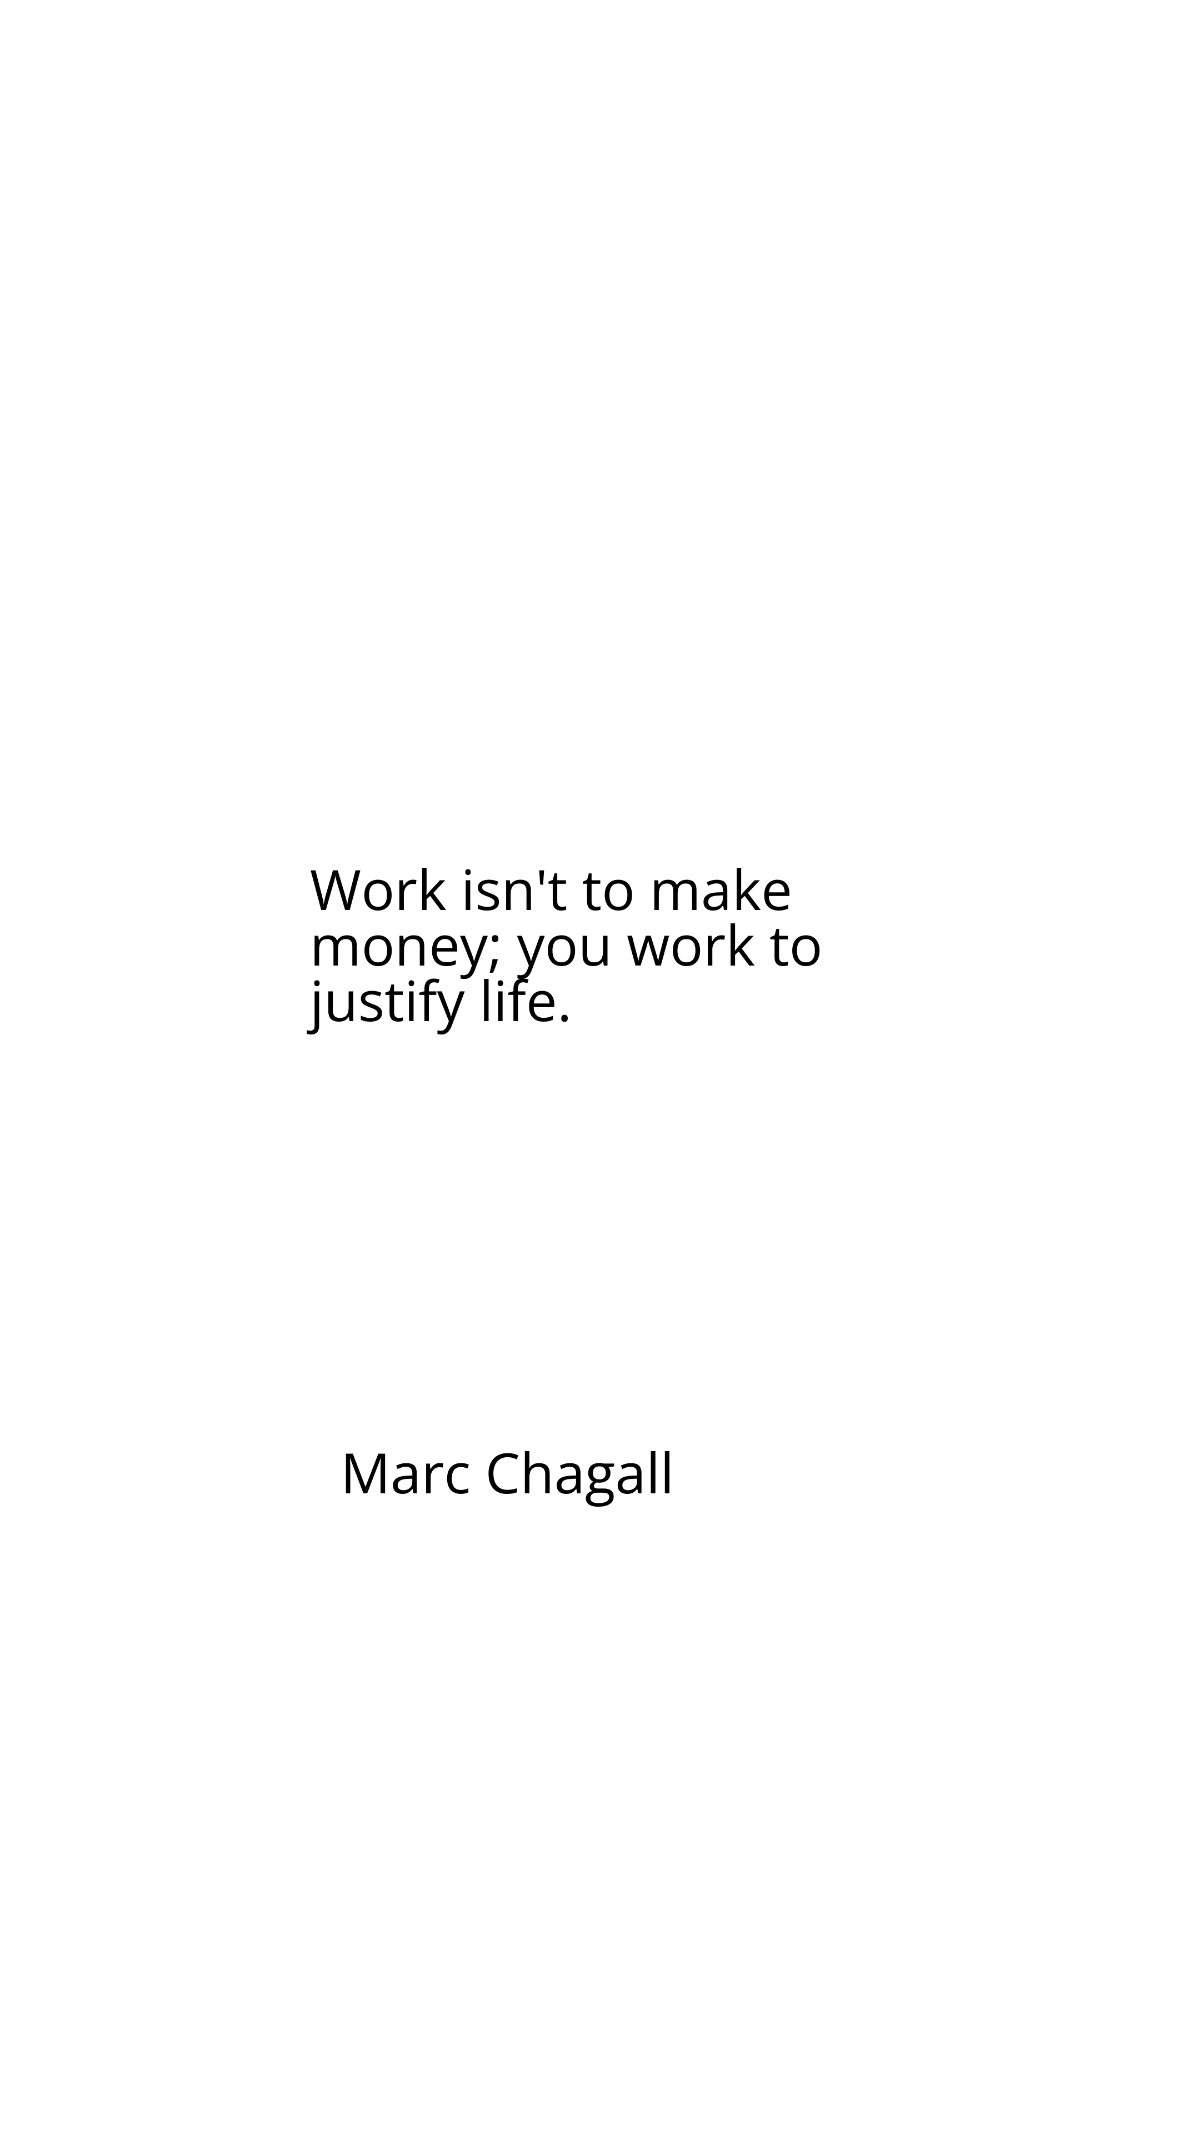 Free Marc Chagall - Work isn't to make money; you work to justify life. Template